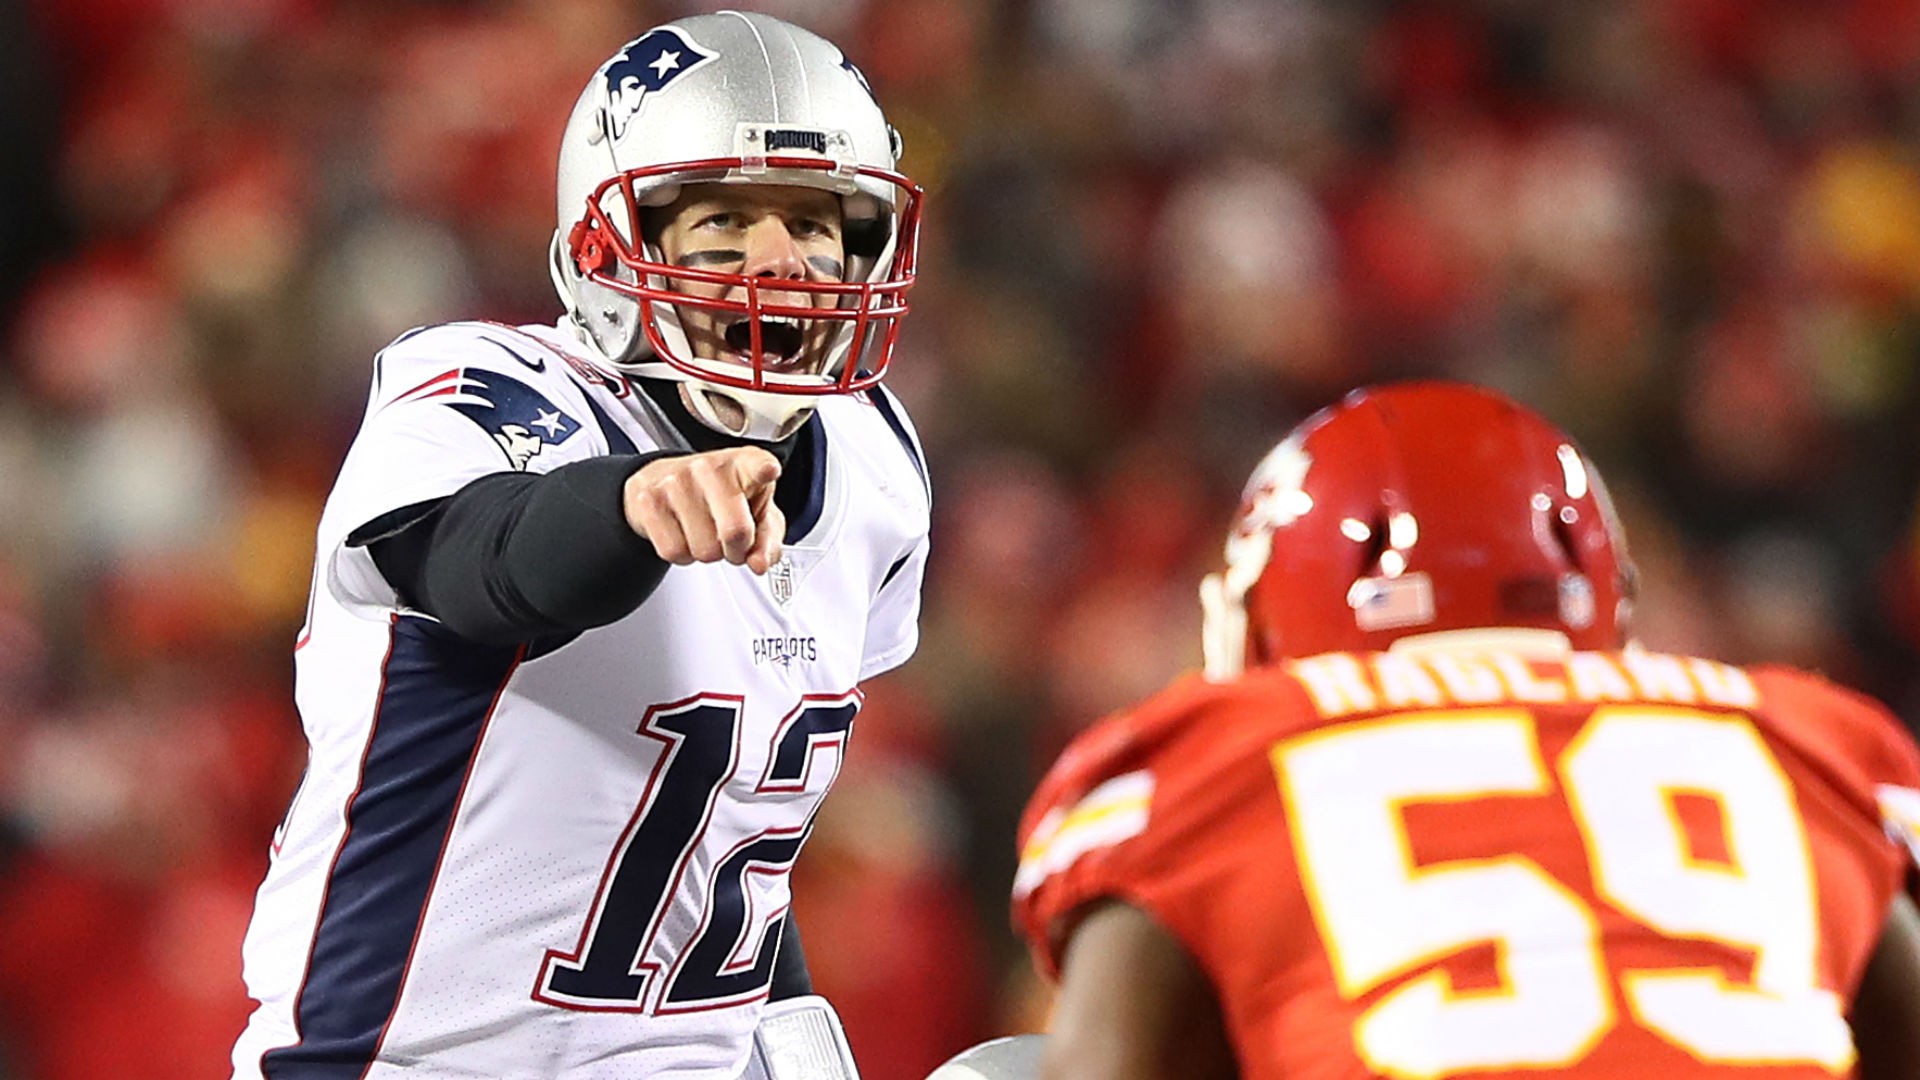 Can the Patriots go 16-0? Ranking the teams most likely to ruin New England's shot at undefeated season